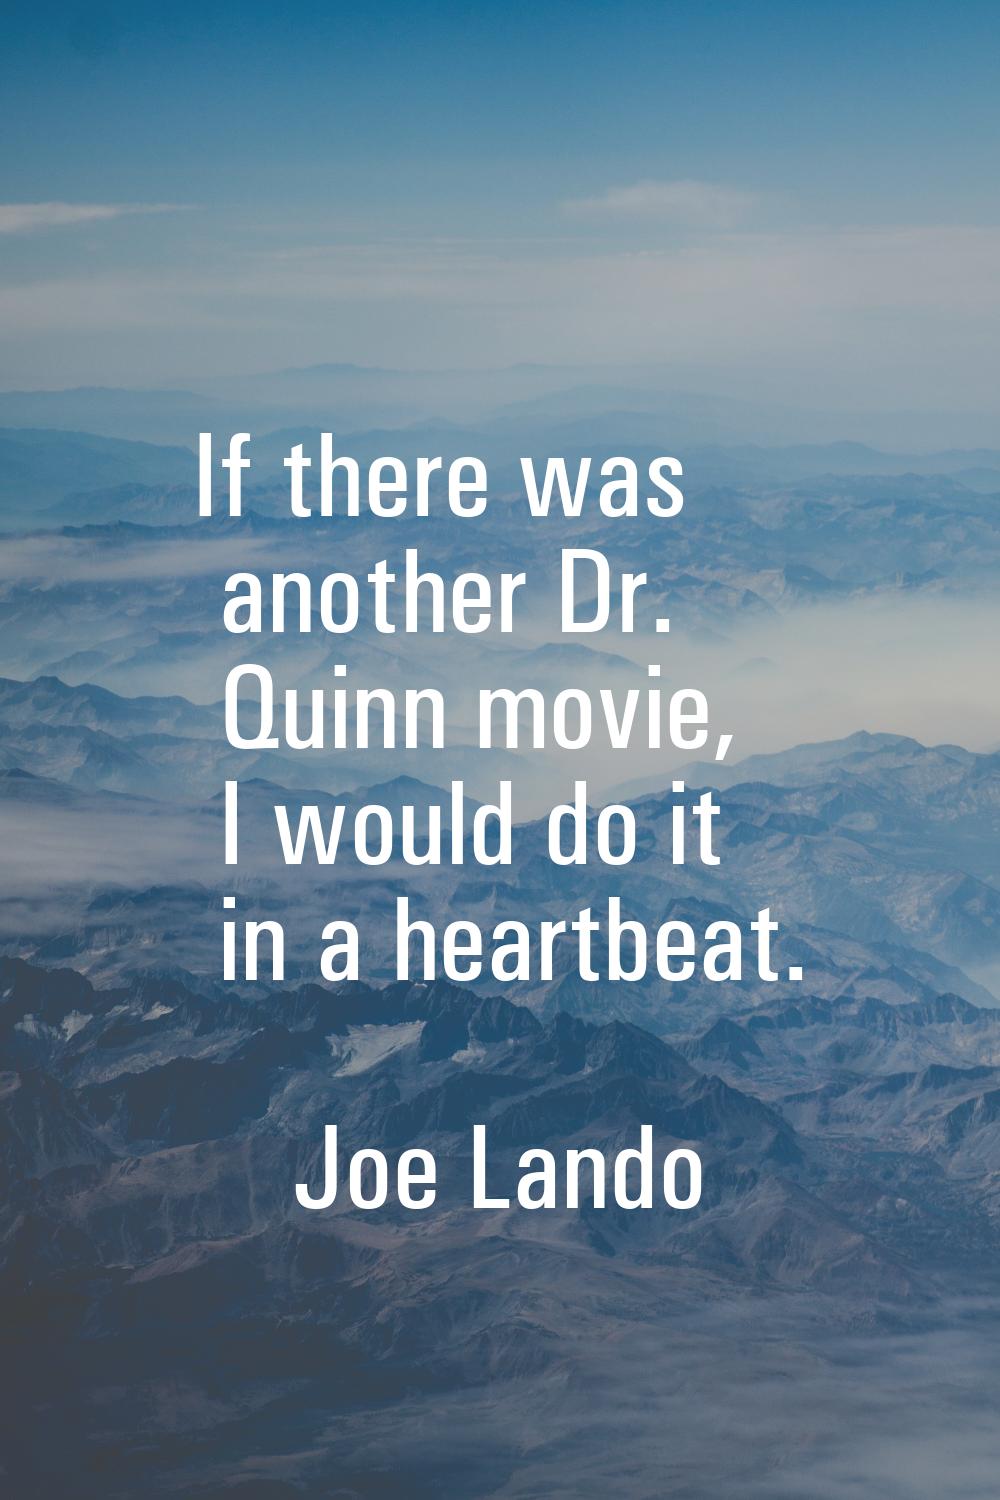 If there was another Dr. Quinn movie, I would do it in a heartbeat.